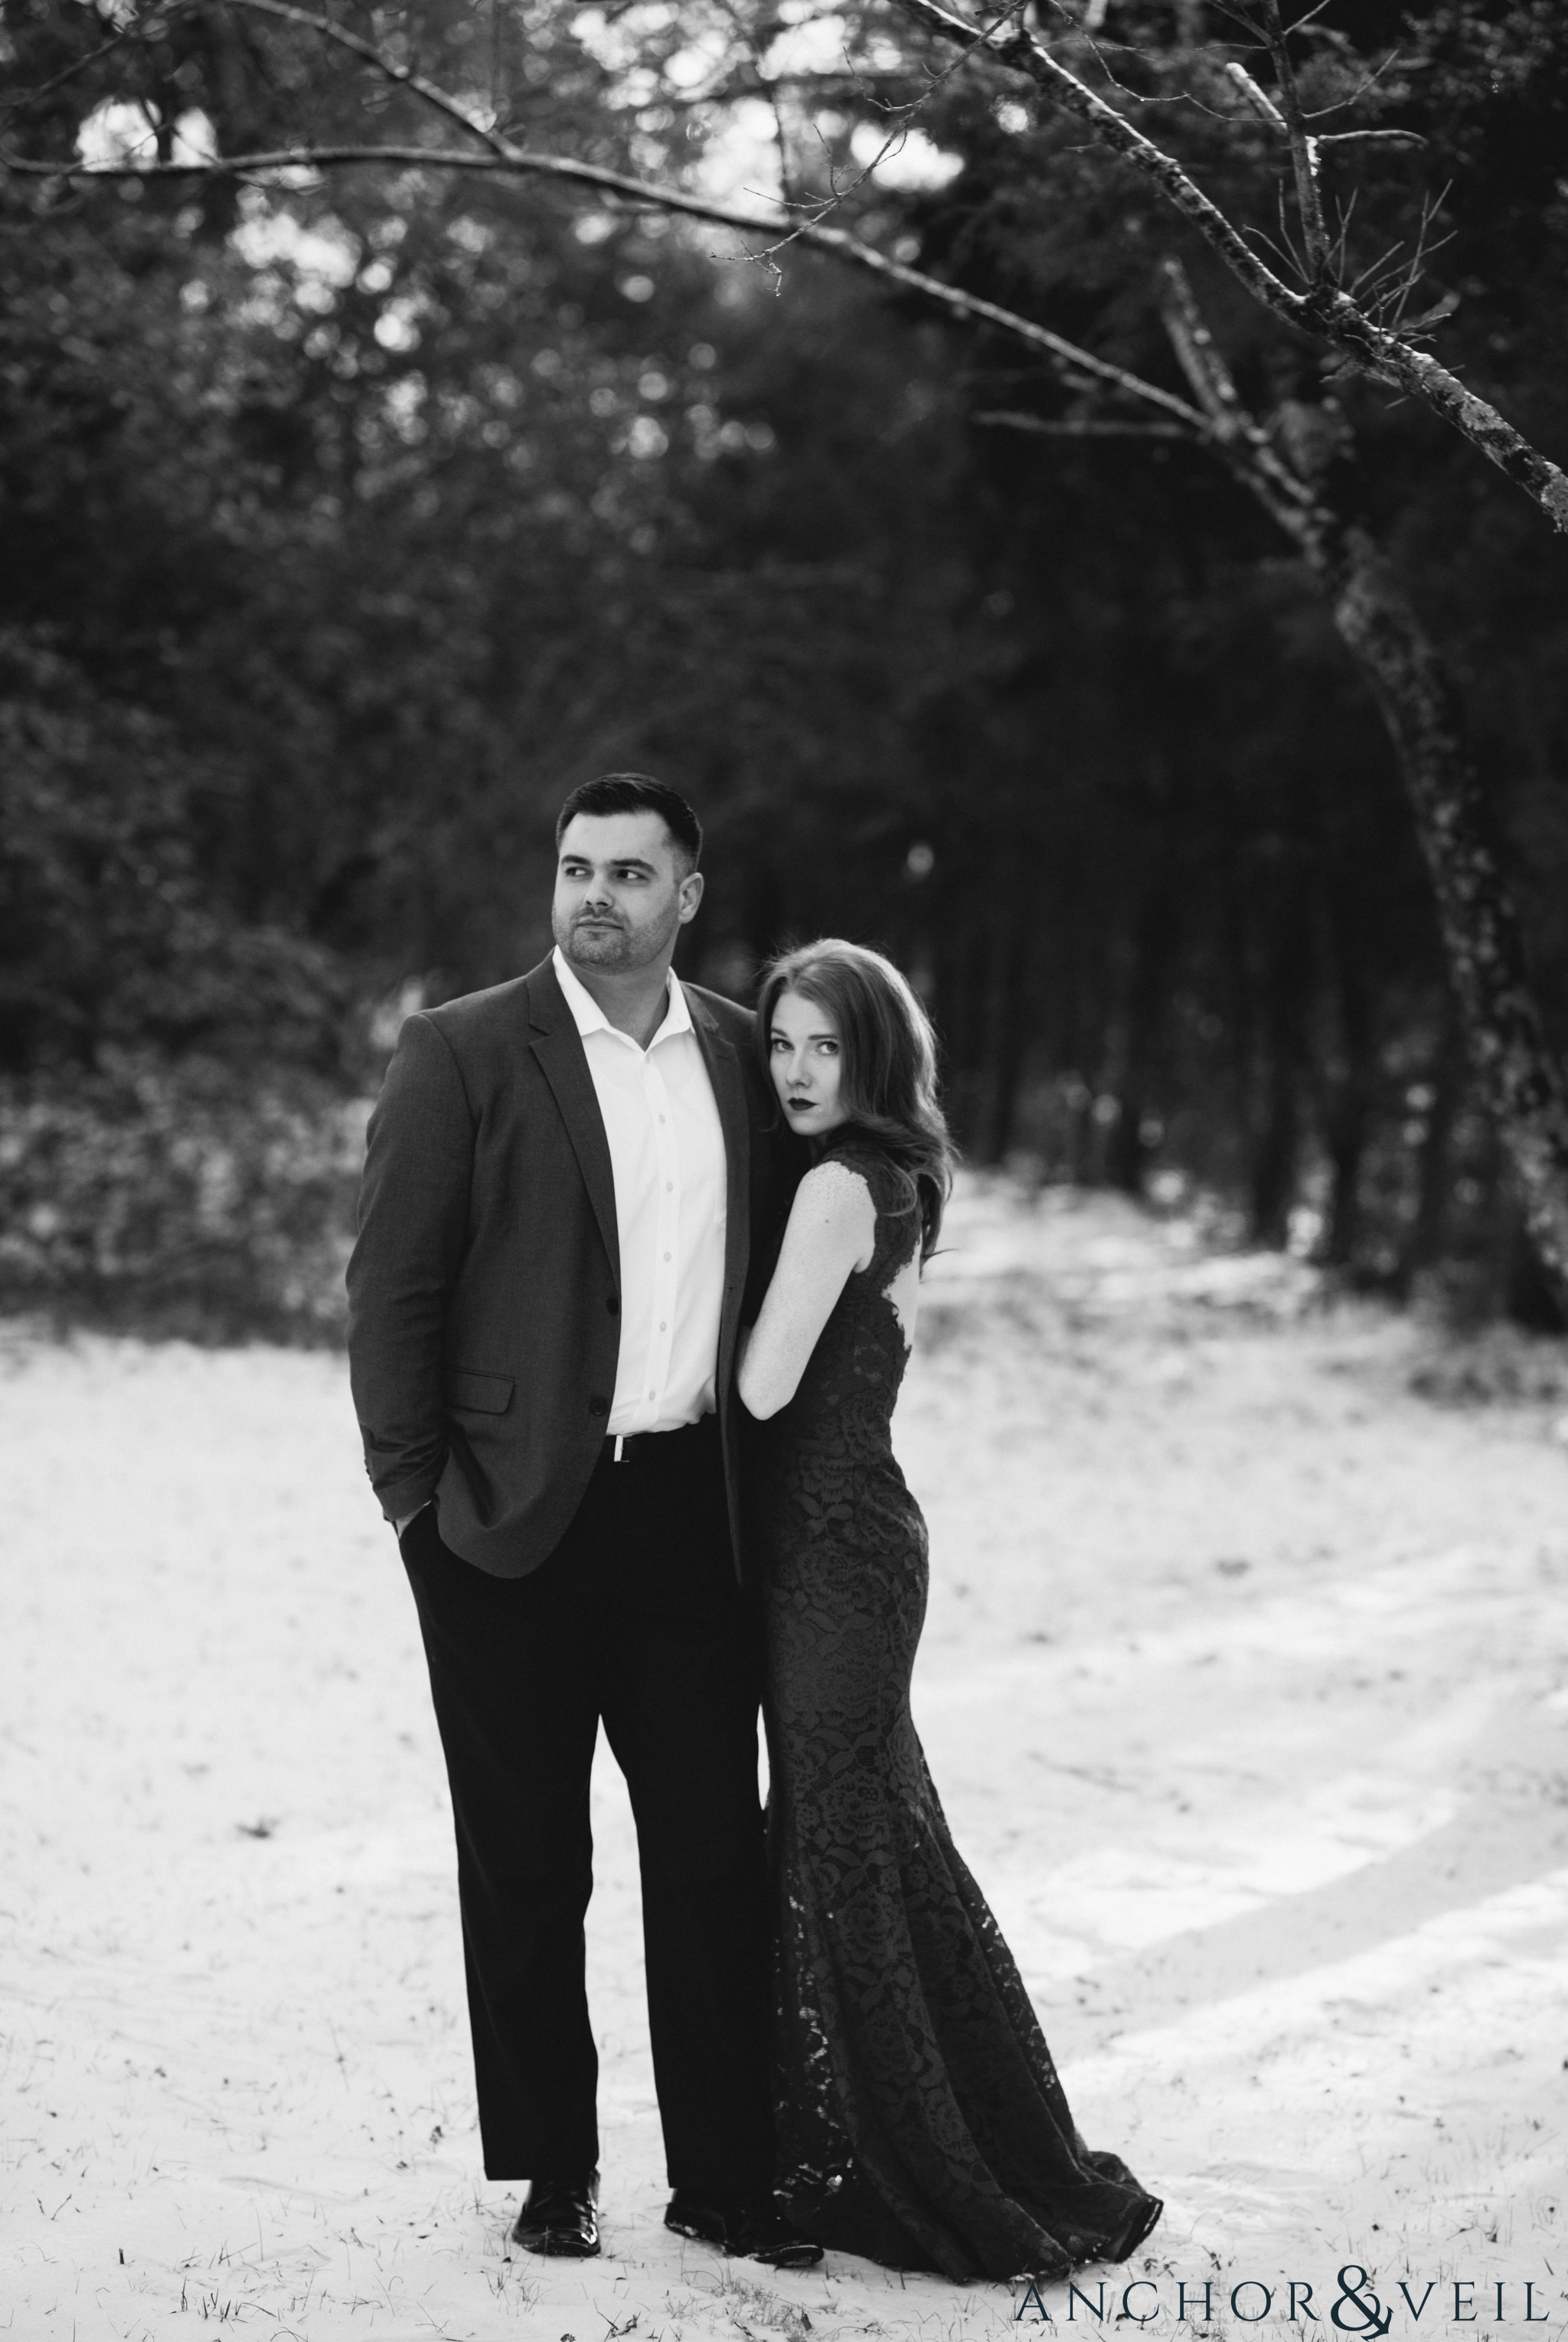 looking off in teh distance during their Charlotte Snow engagement session in the woods